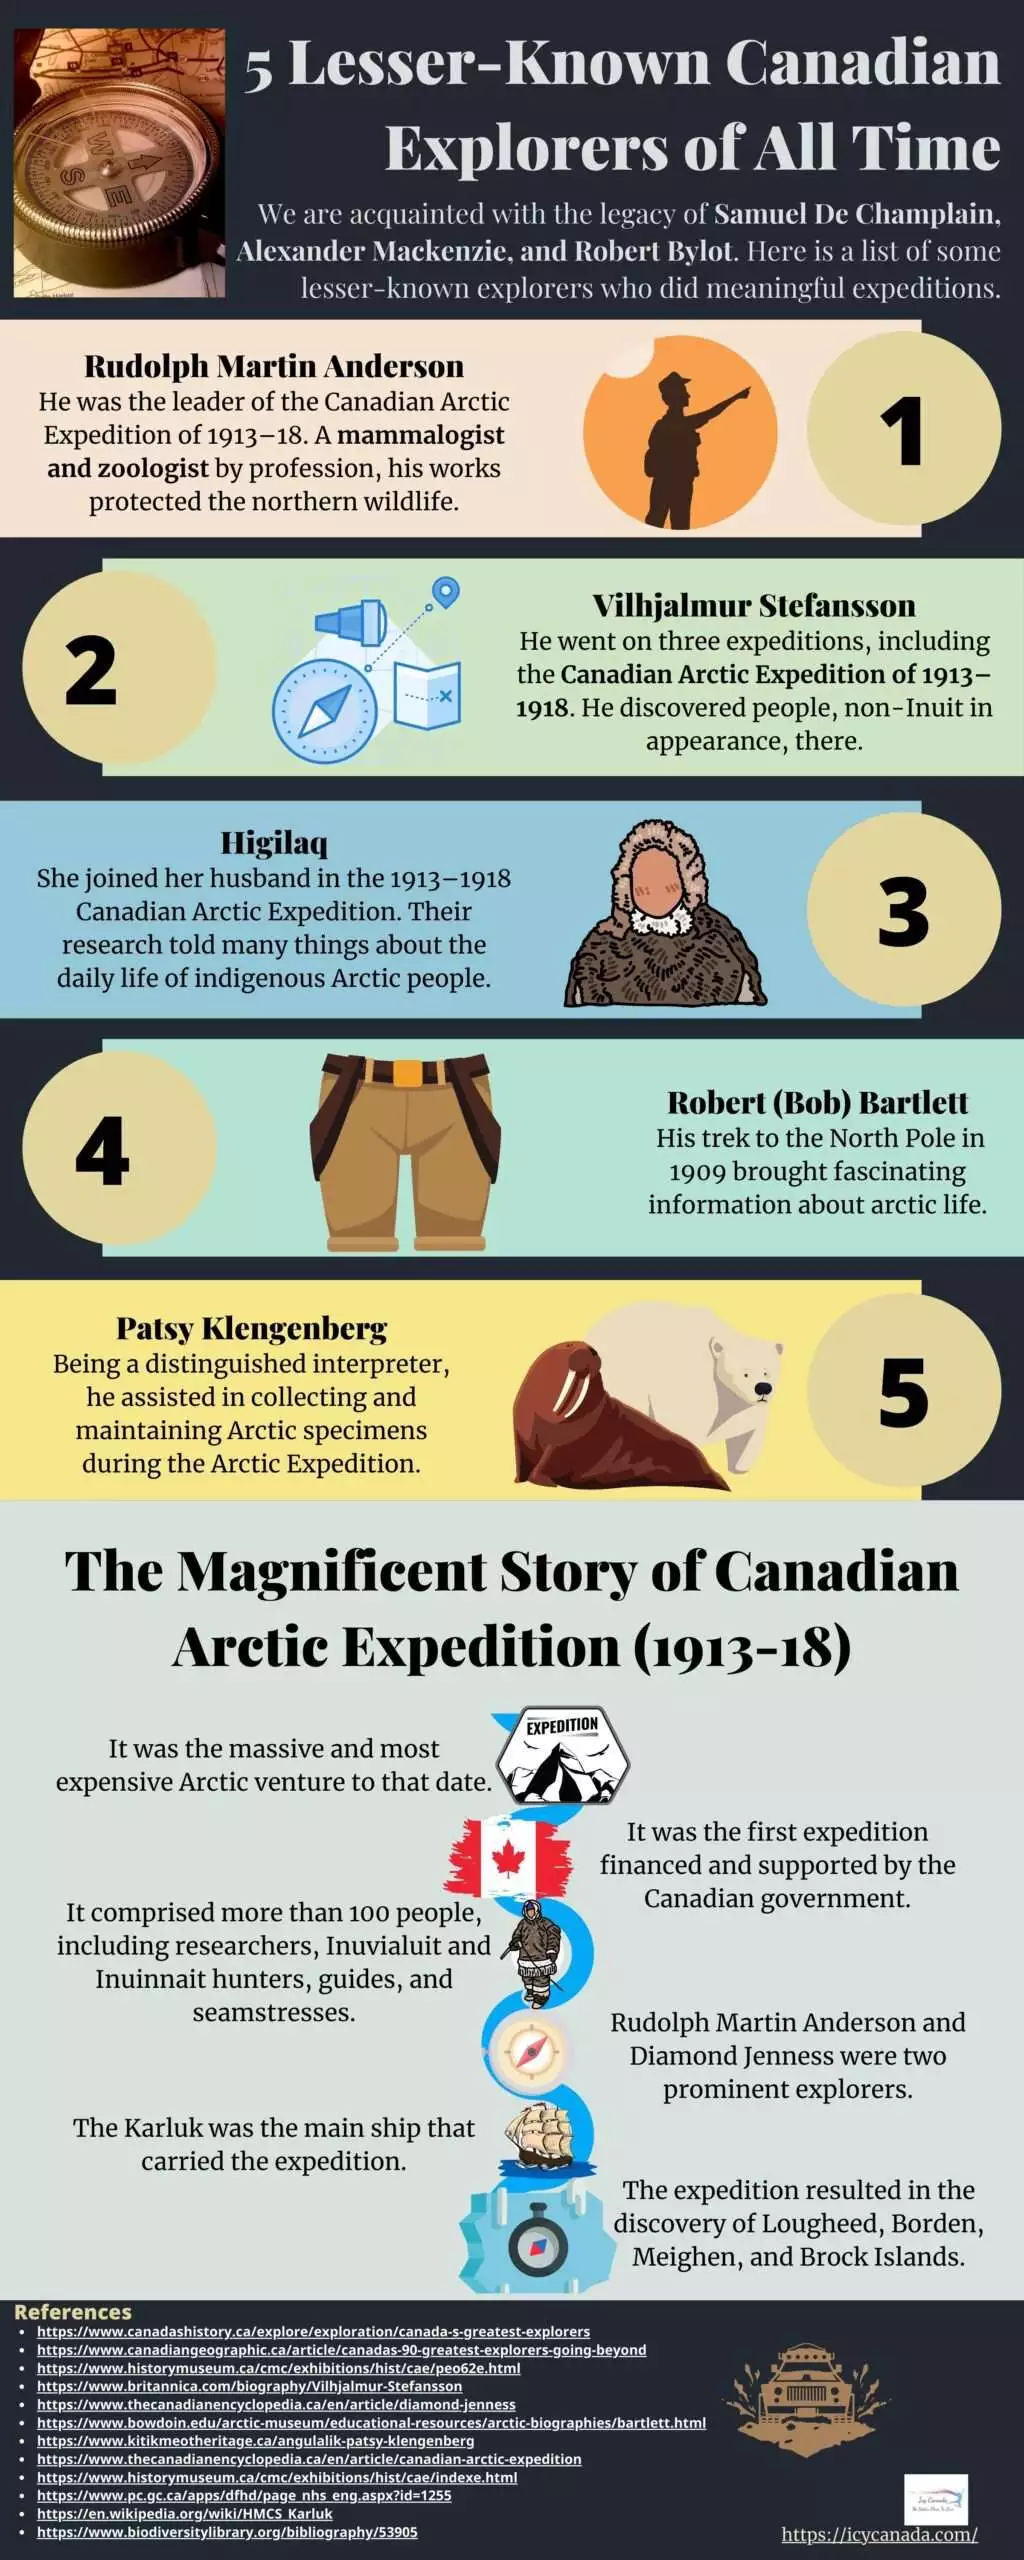 5 Lesser-Known Canadian Explorers of All Time